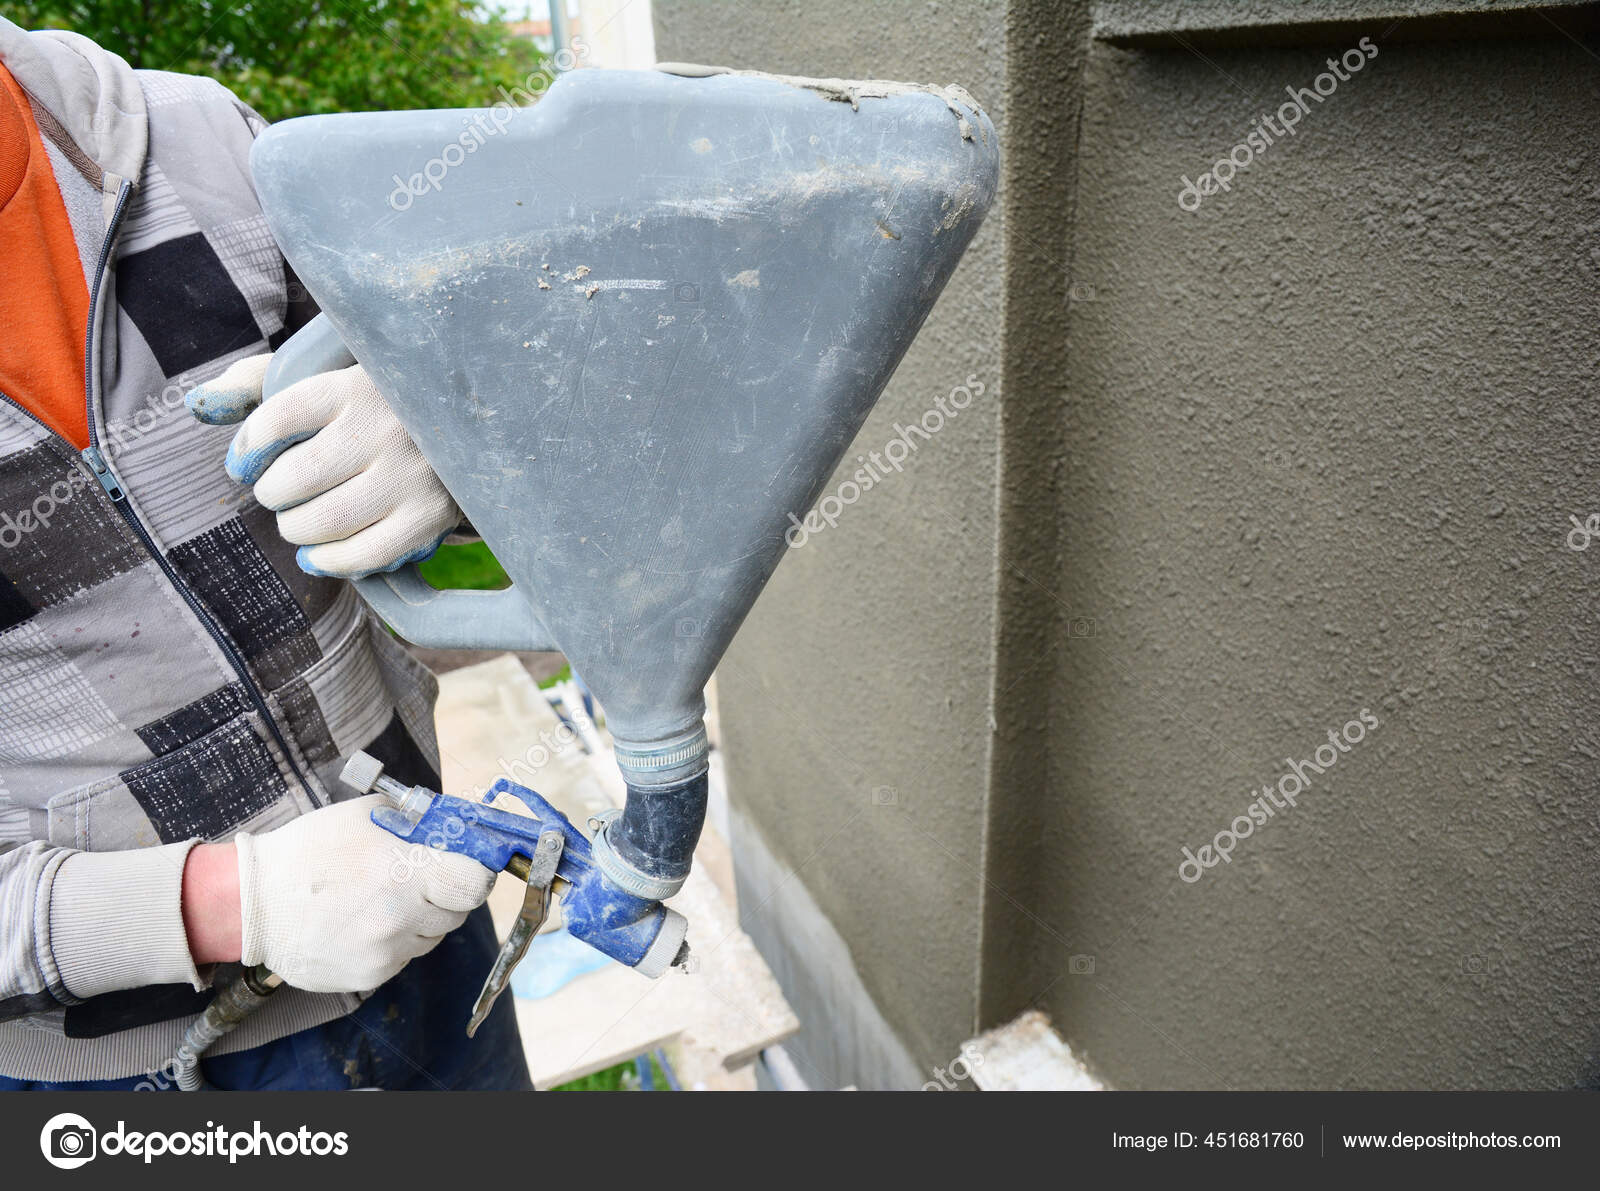 A building contractor is renovating, rendering exterior walls of the house, applying stucco, spaying texture using a texture air spray gun.